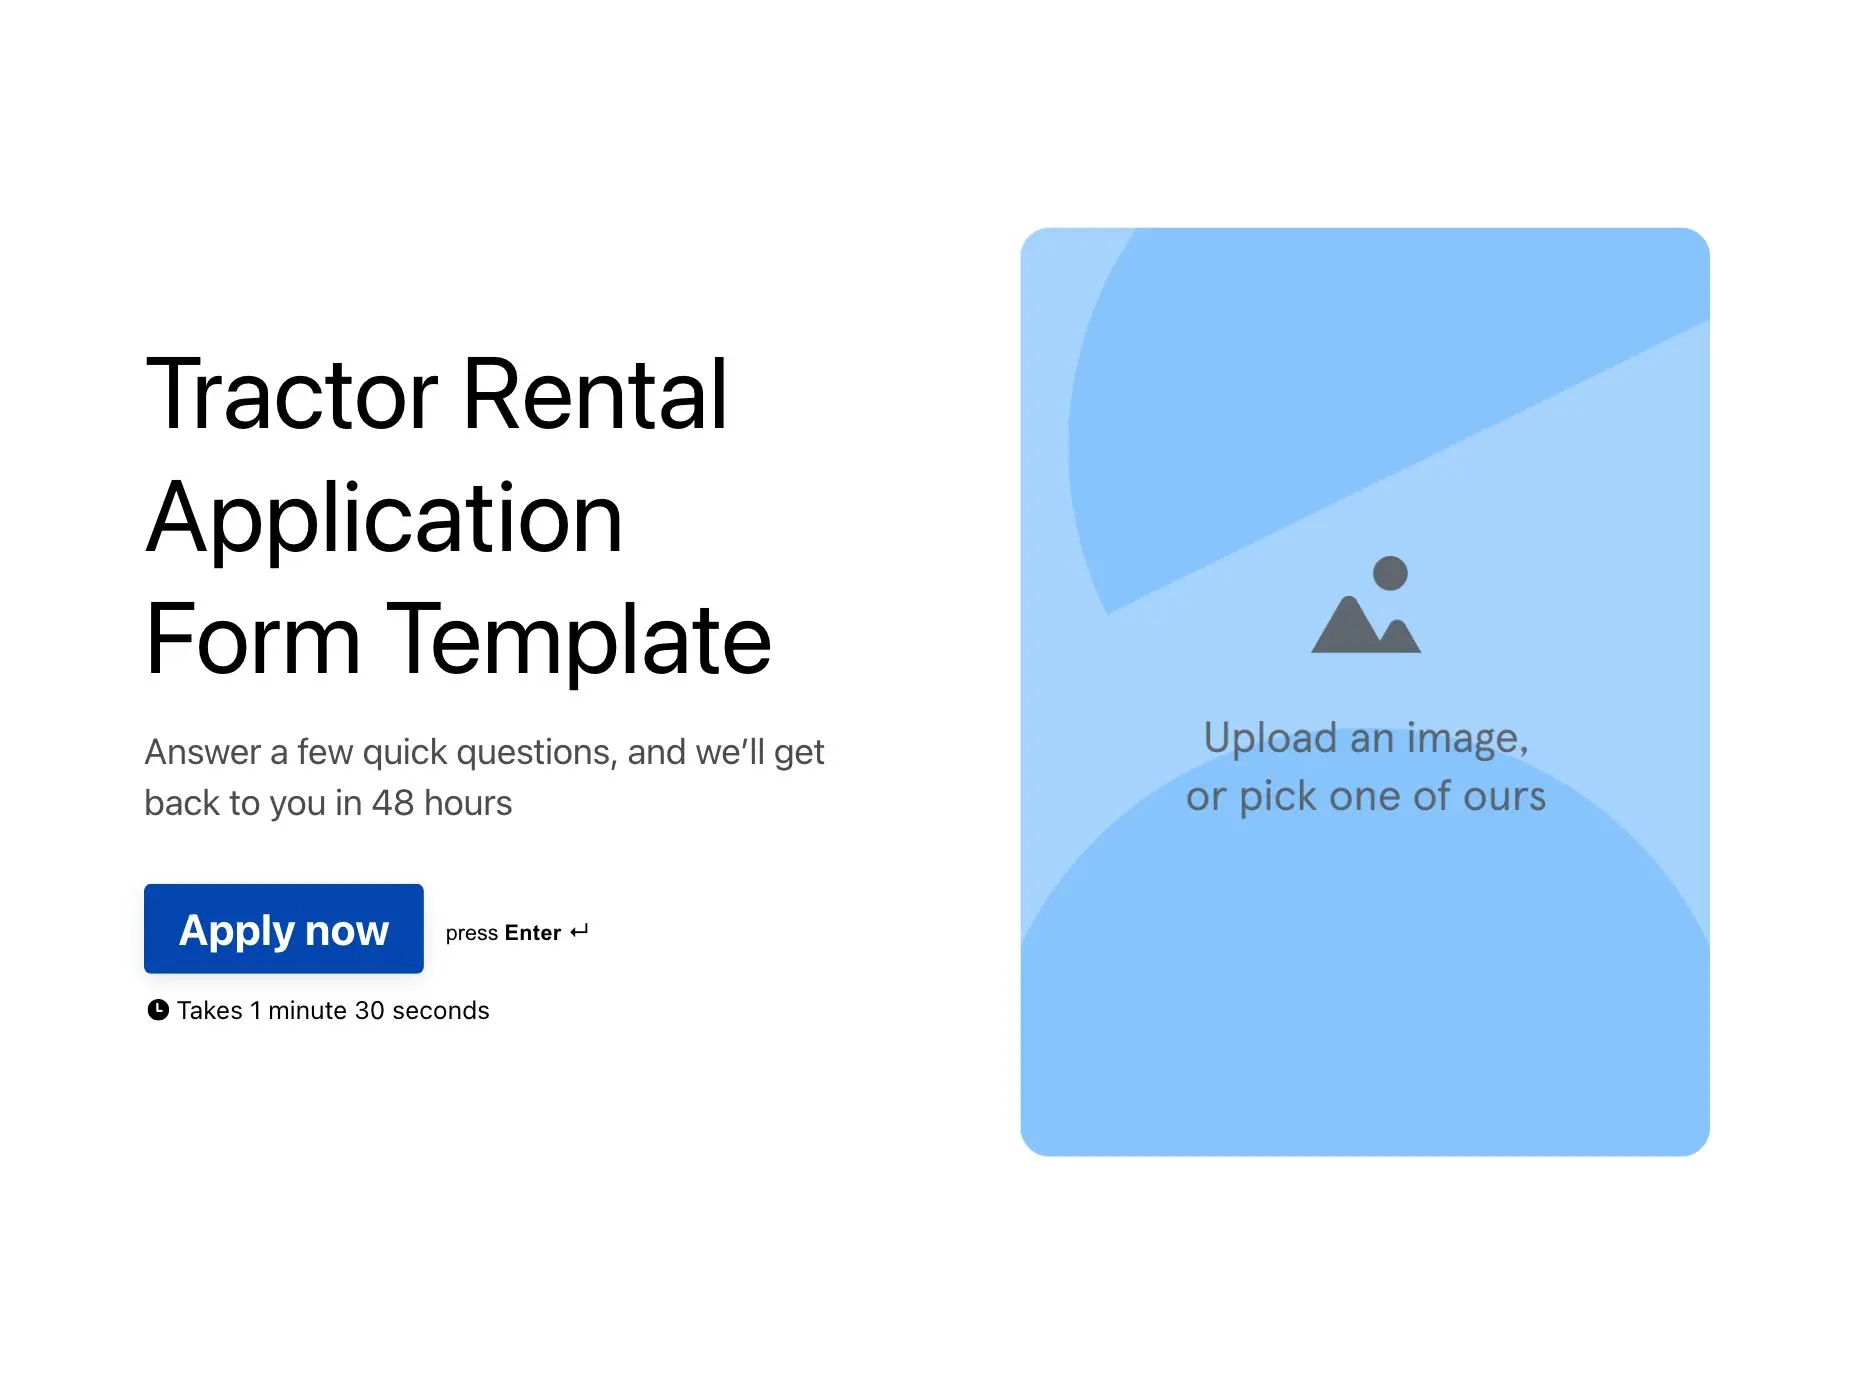 Tractor Rental Application Form Template Hero